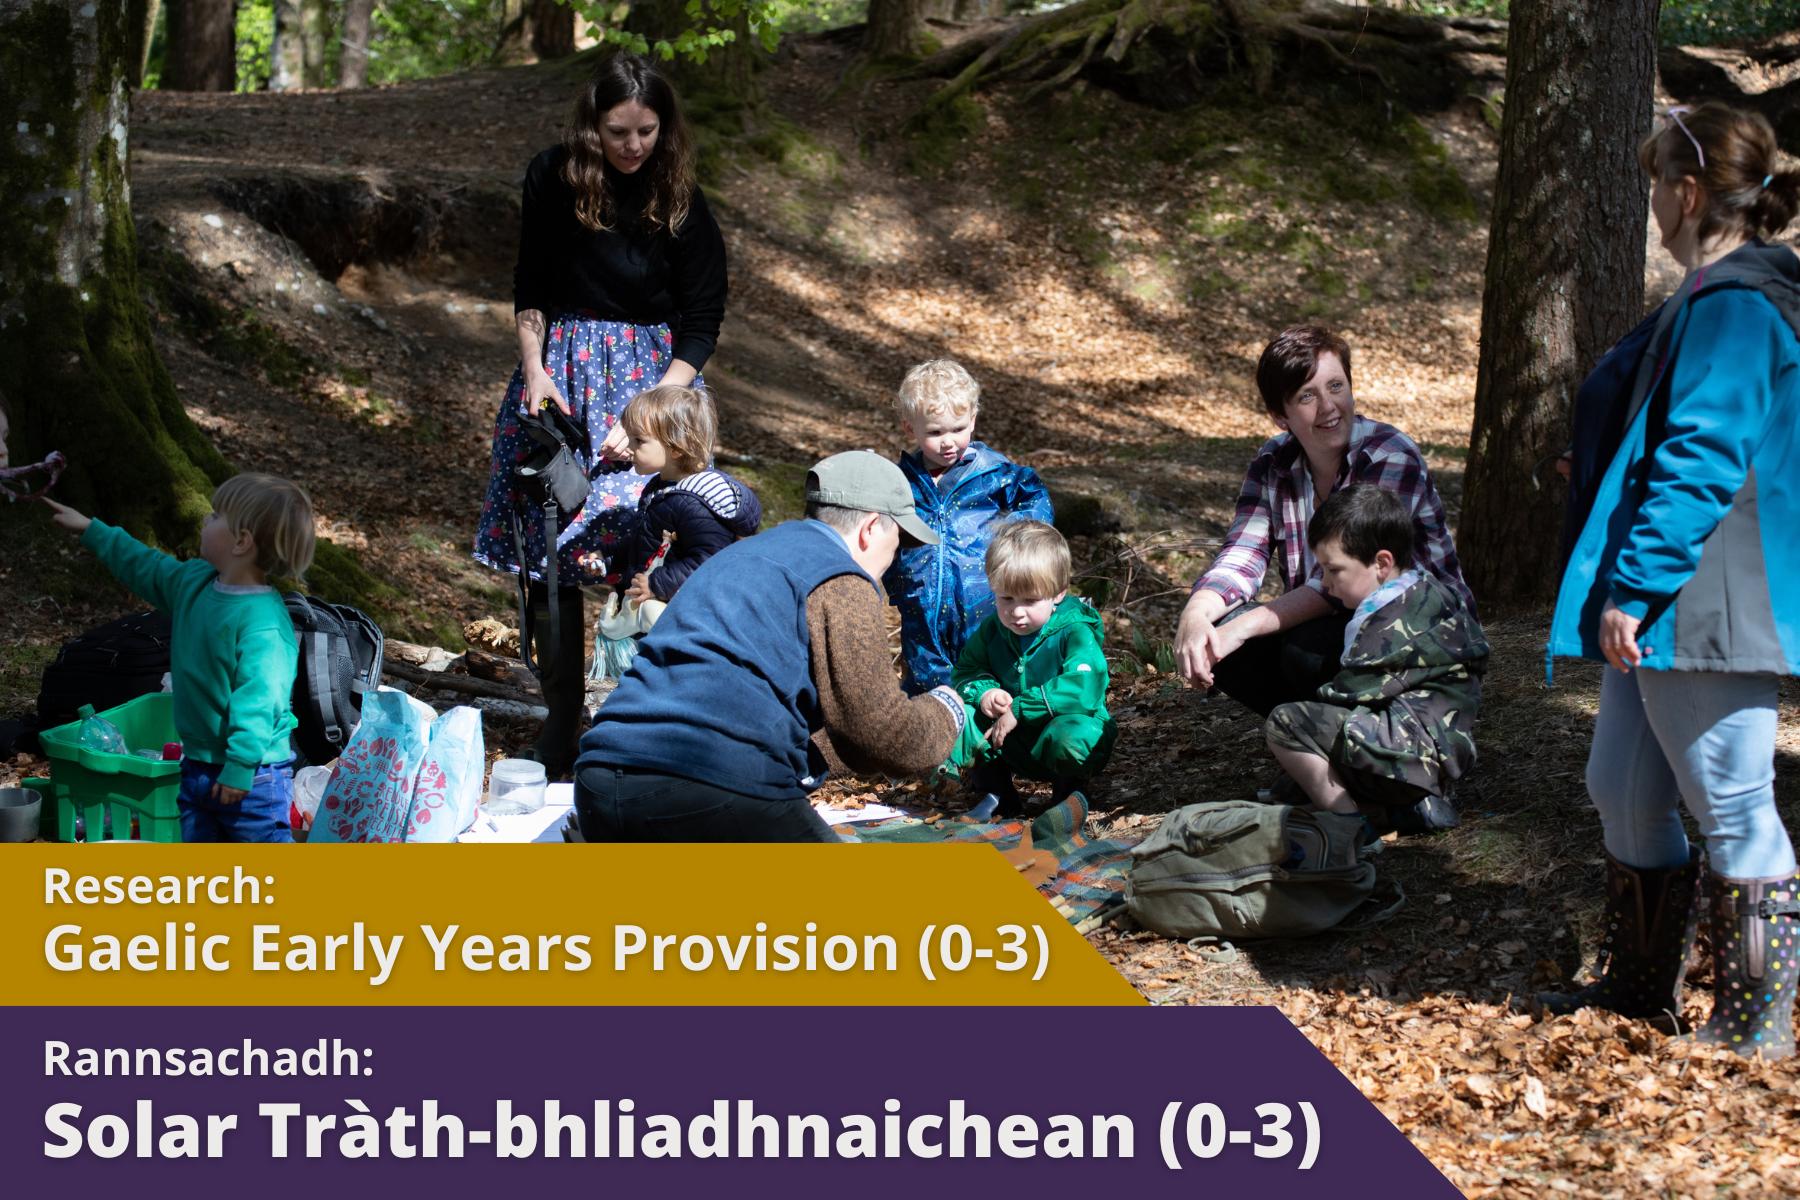 Research on Gaelic Early Years Provision (0-3)